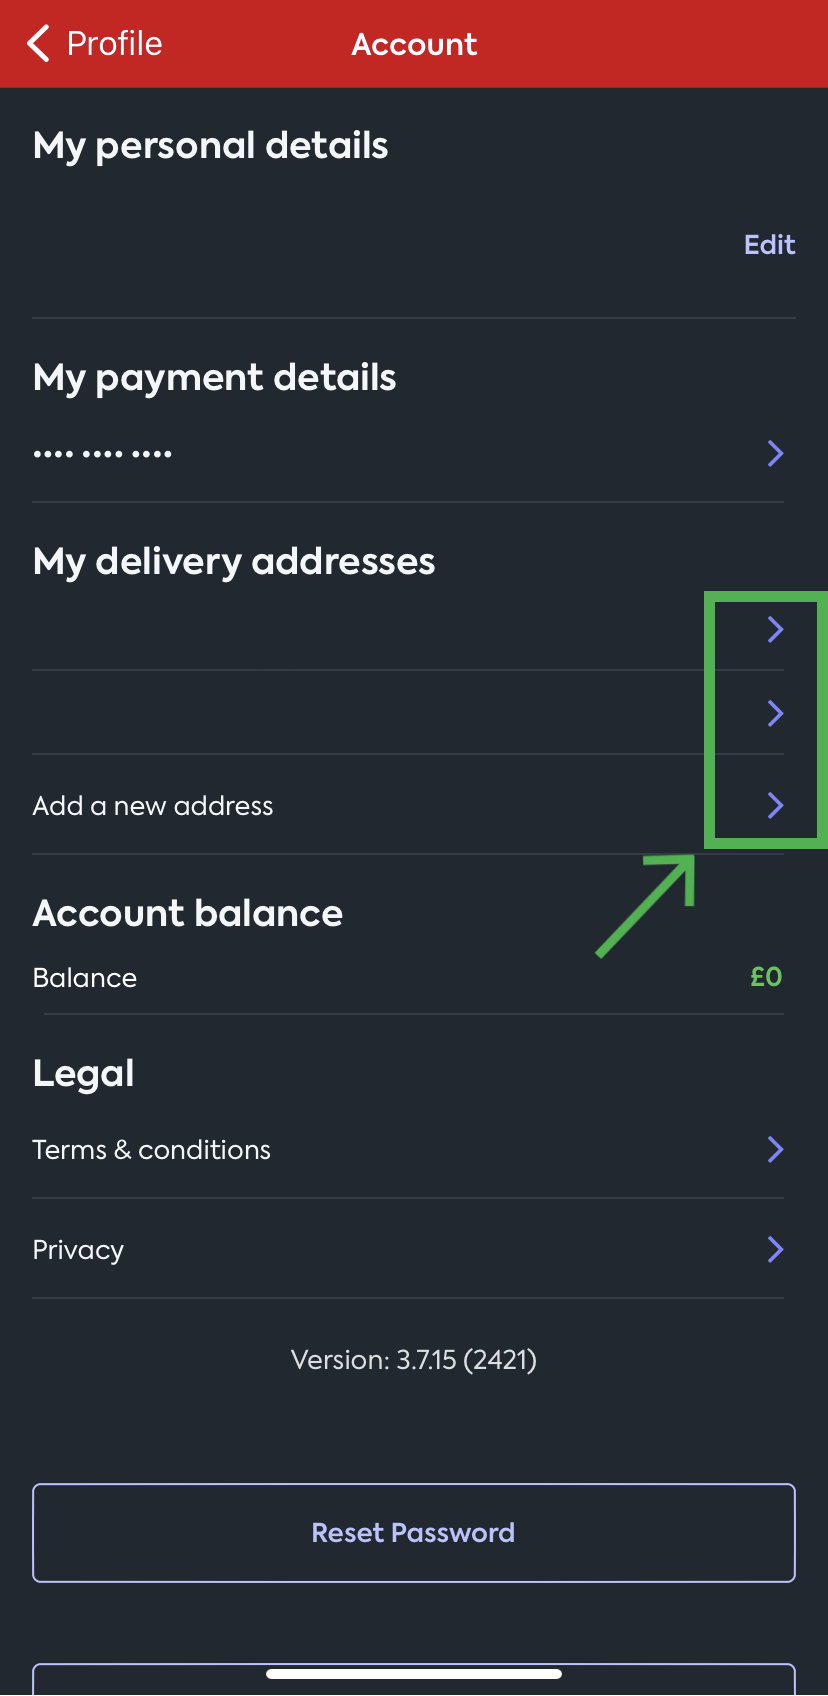 Account_Details-My_delivery_addresses.png